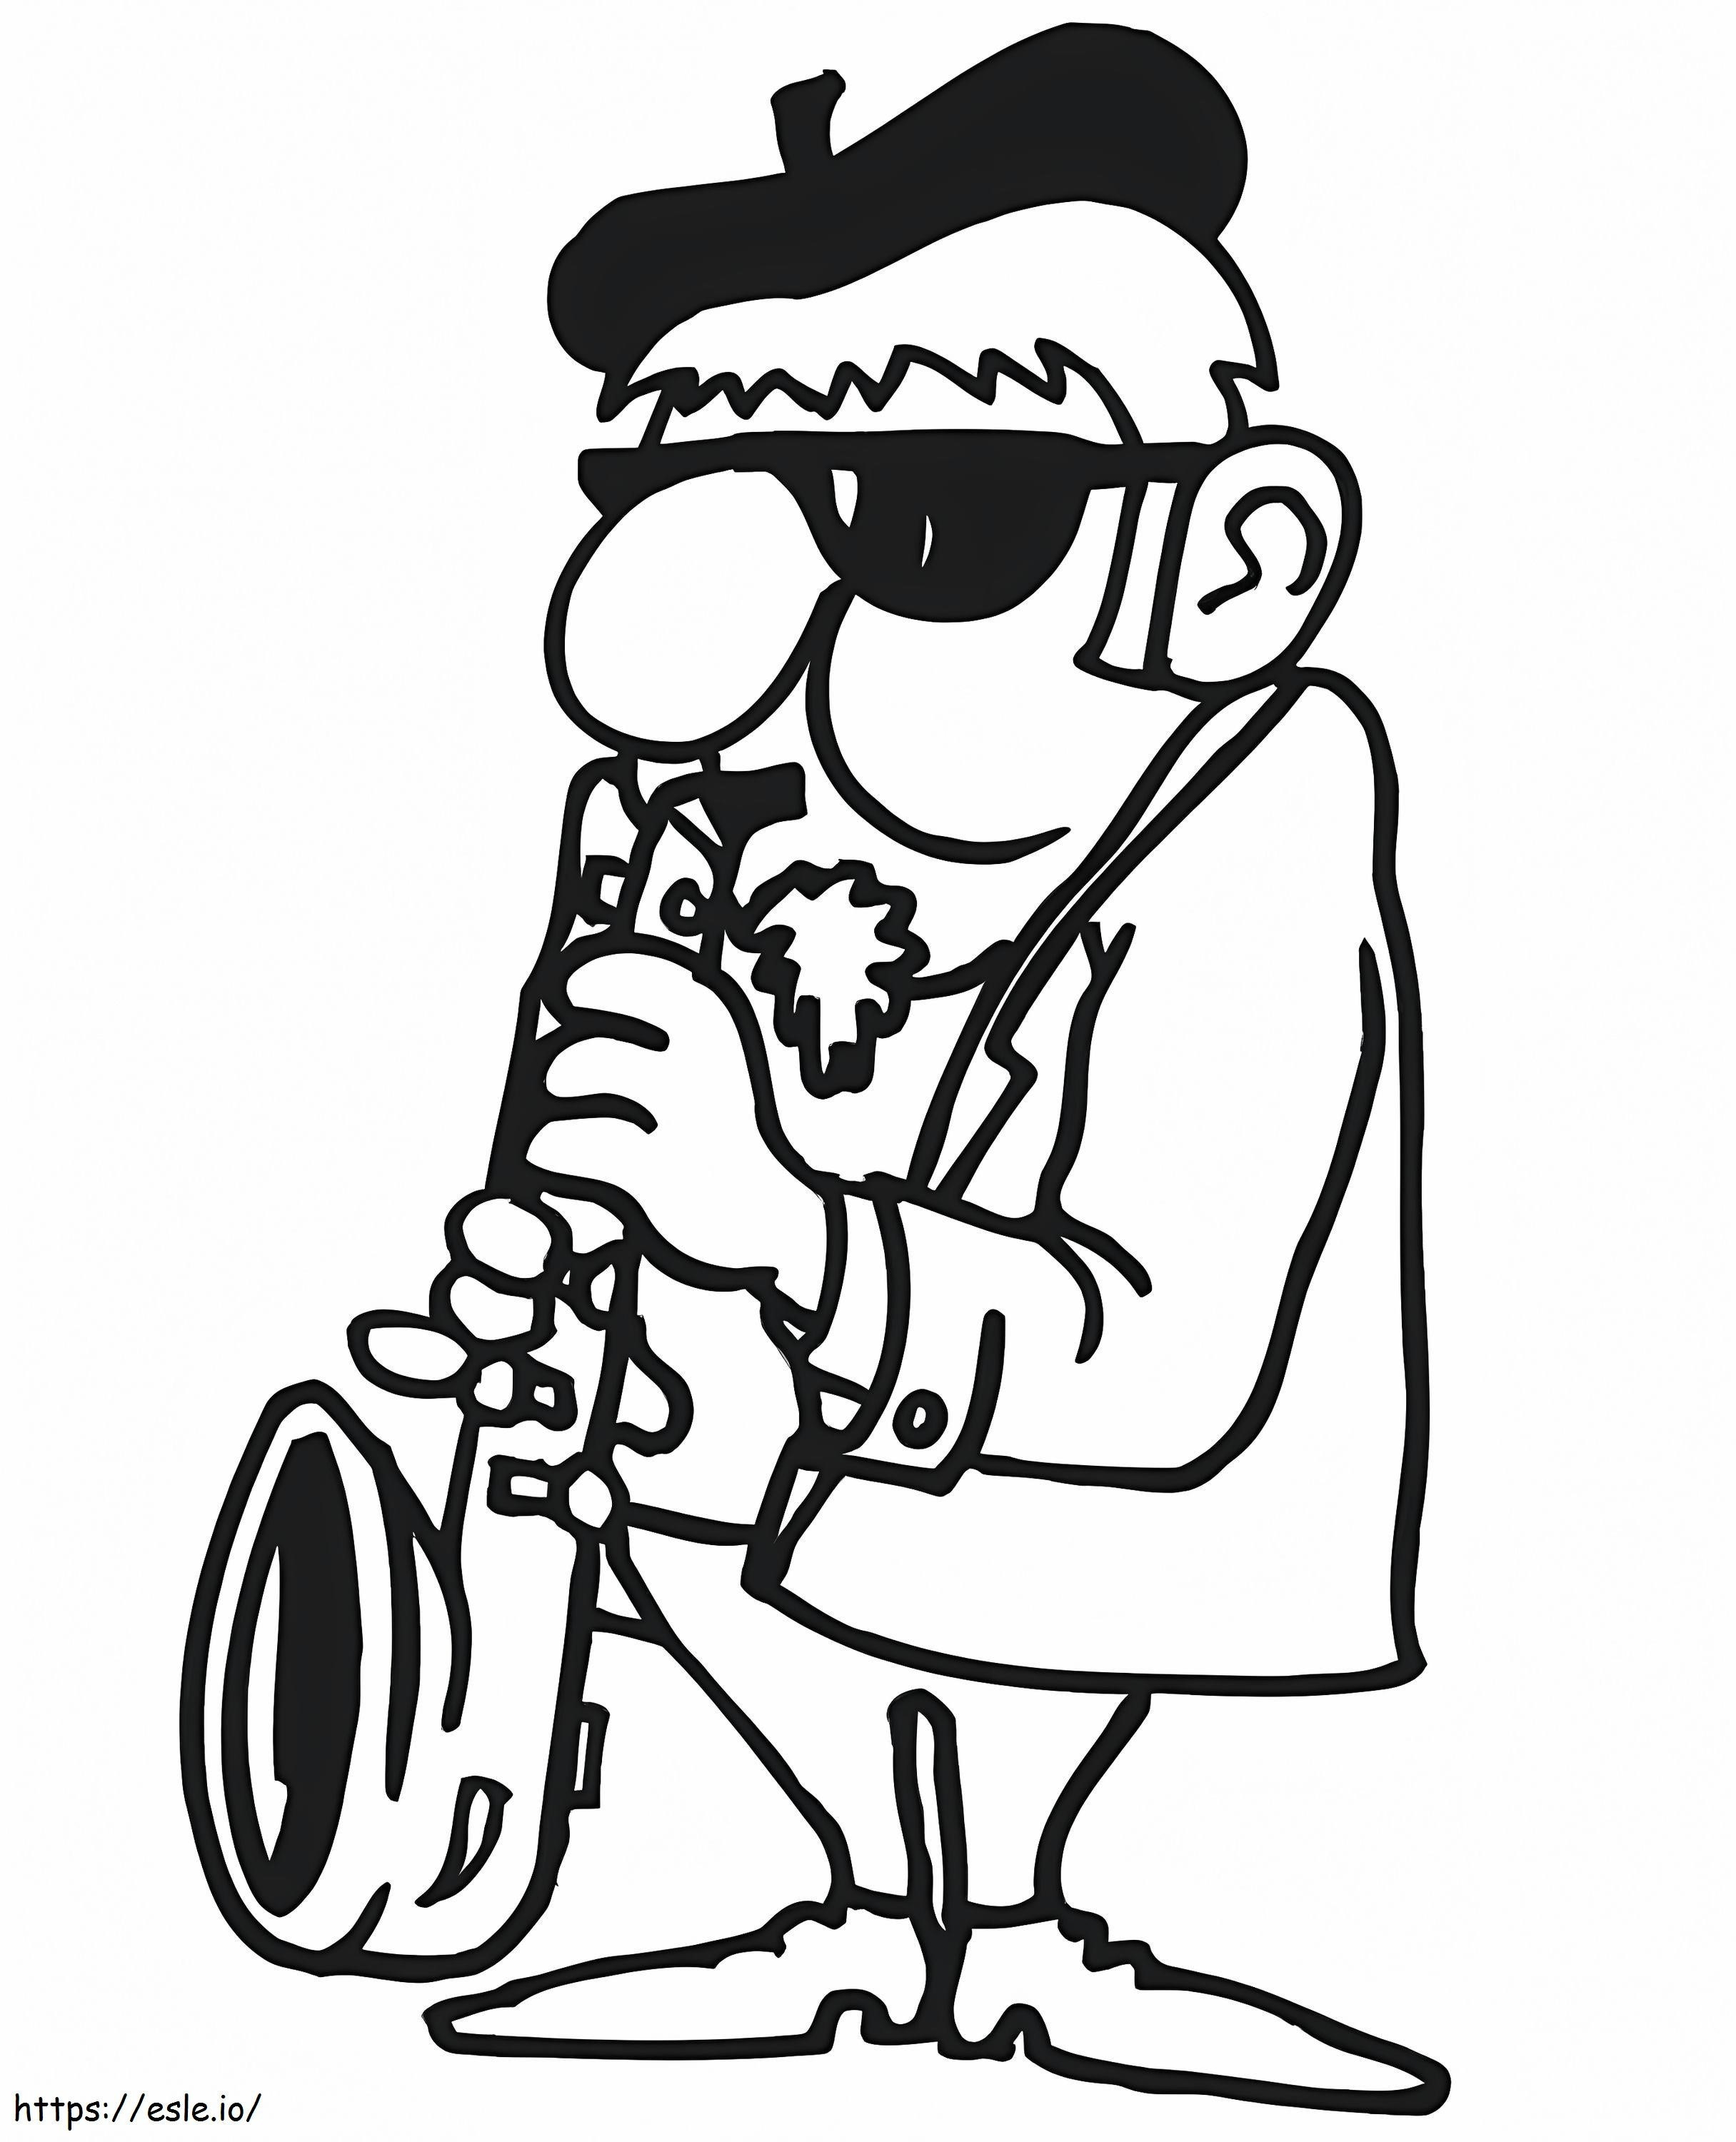 Old Saxophonist coloring page